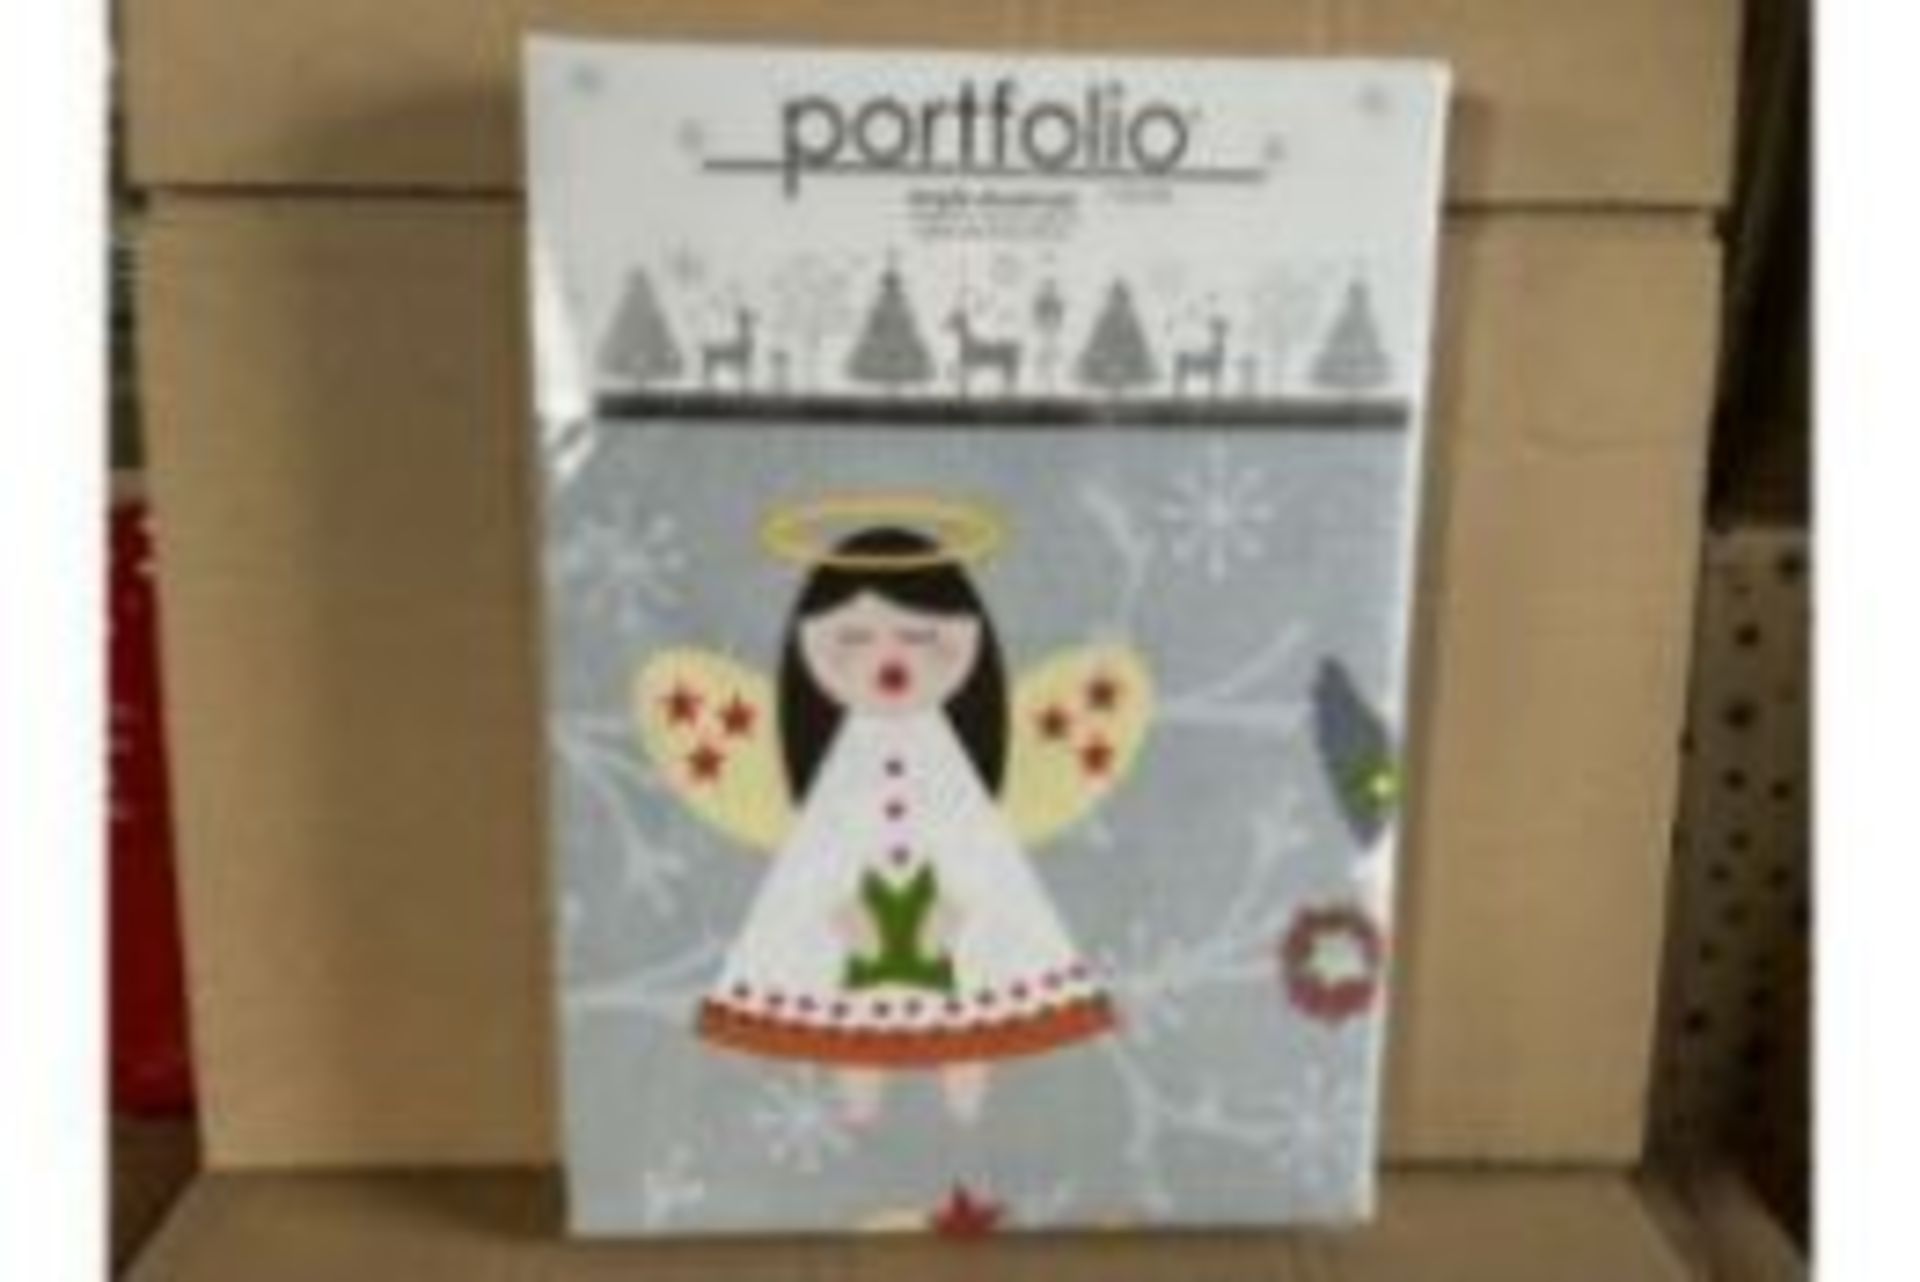 TRADE LOT 15 X BRAND NEW PORTFOLIO HOME CHOIR OF ANGELS DOUBLE DUVET SETS RRP £60 EACH APW